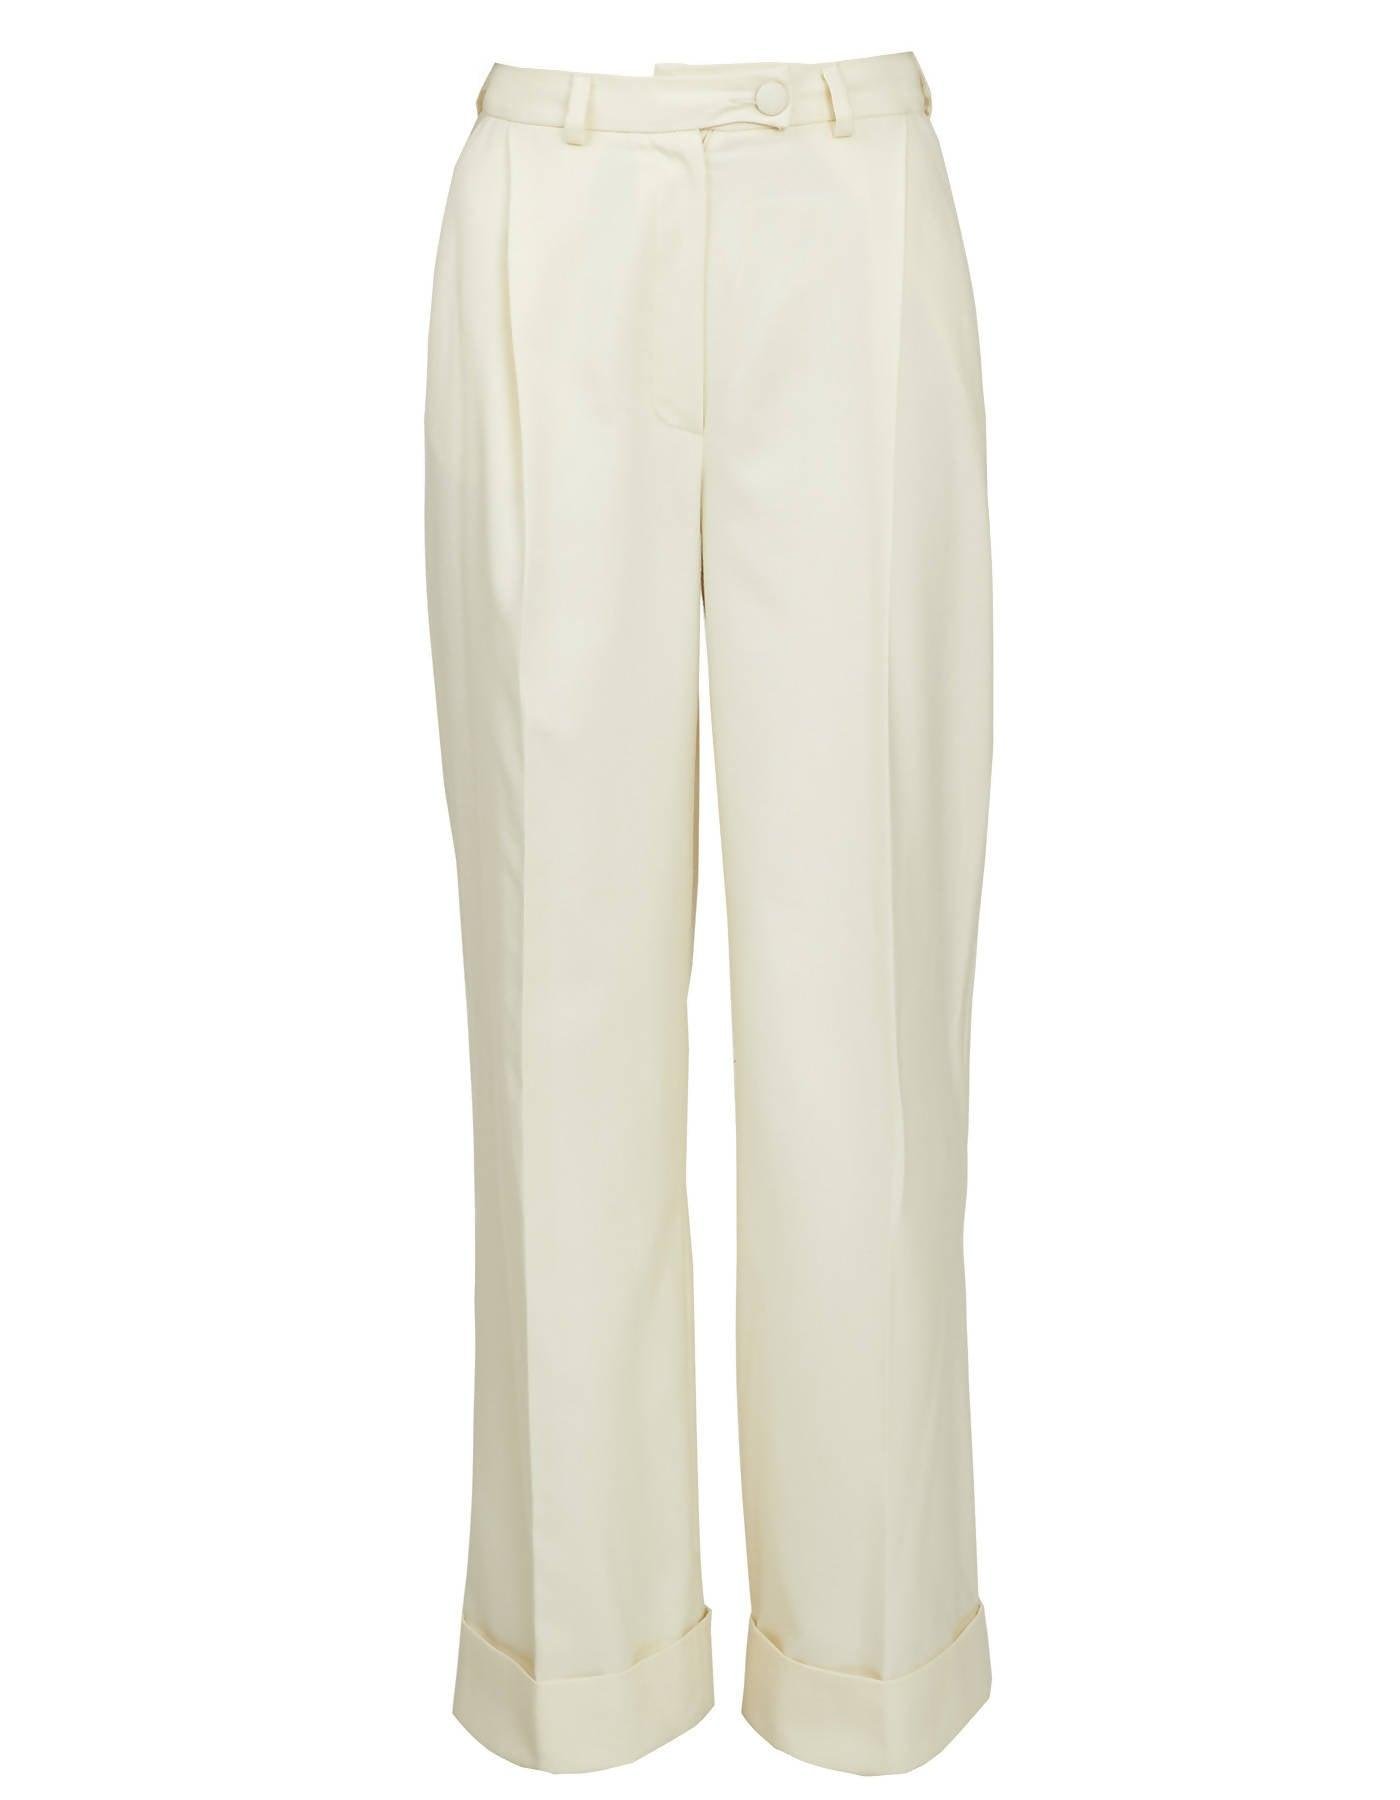 Milky White loose suit pants by BLIKVANGER